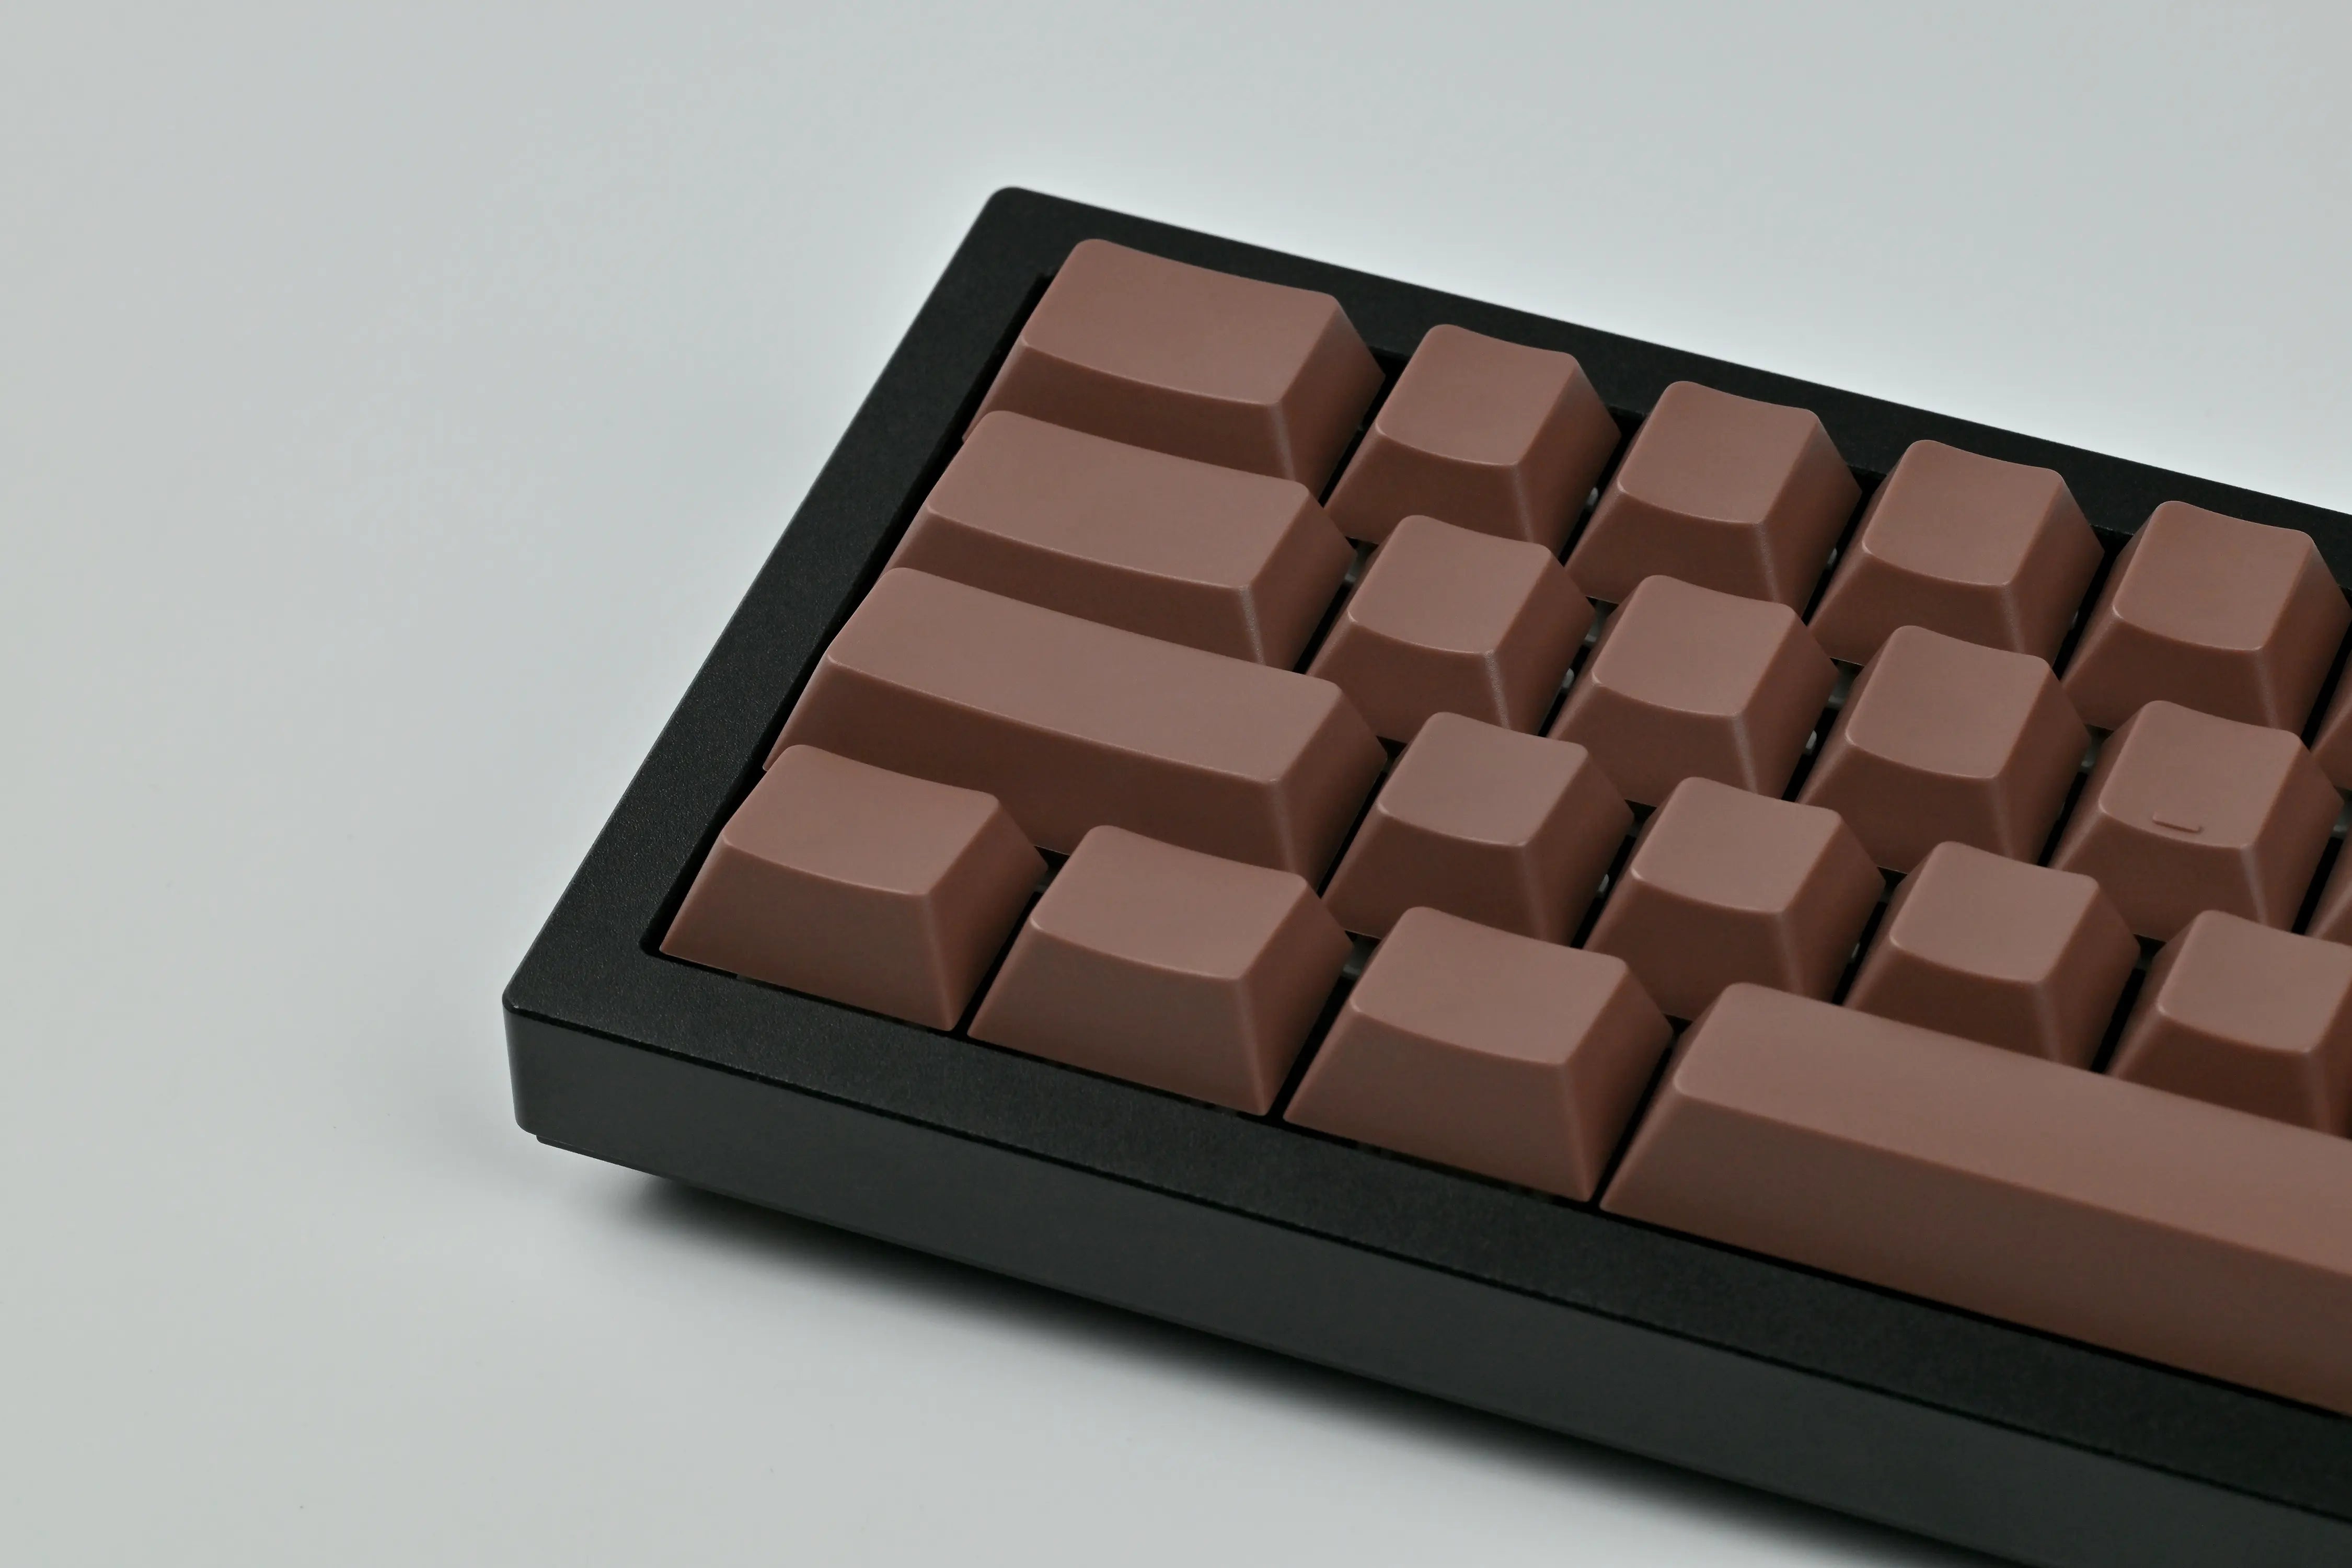 Keyreative ABS Cherry Profile Brown Blank Keycaps